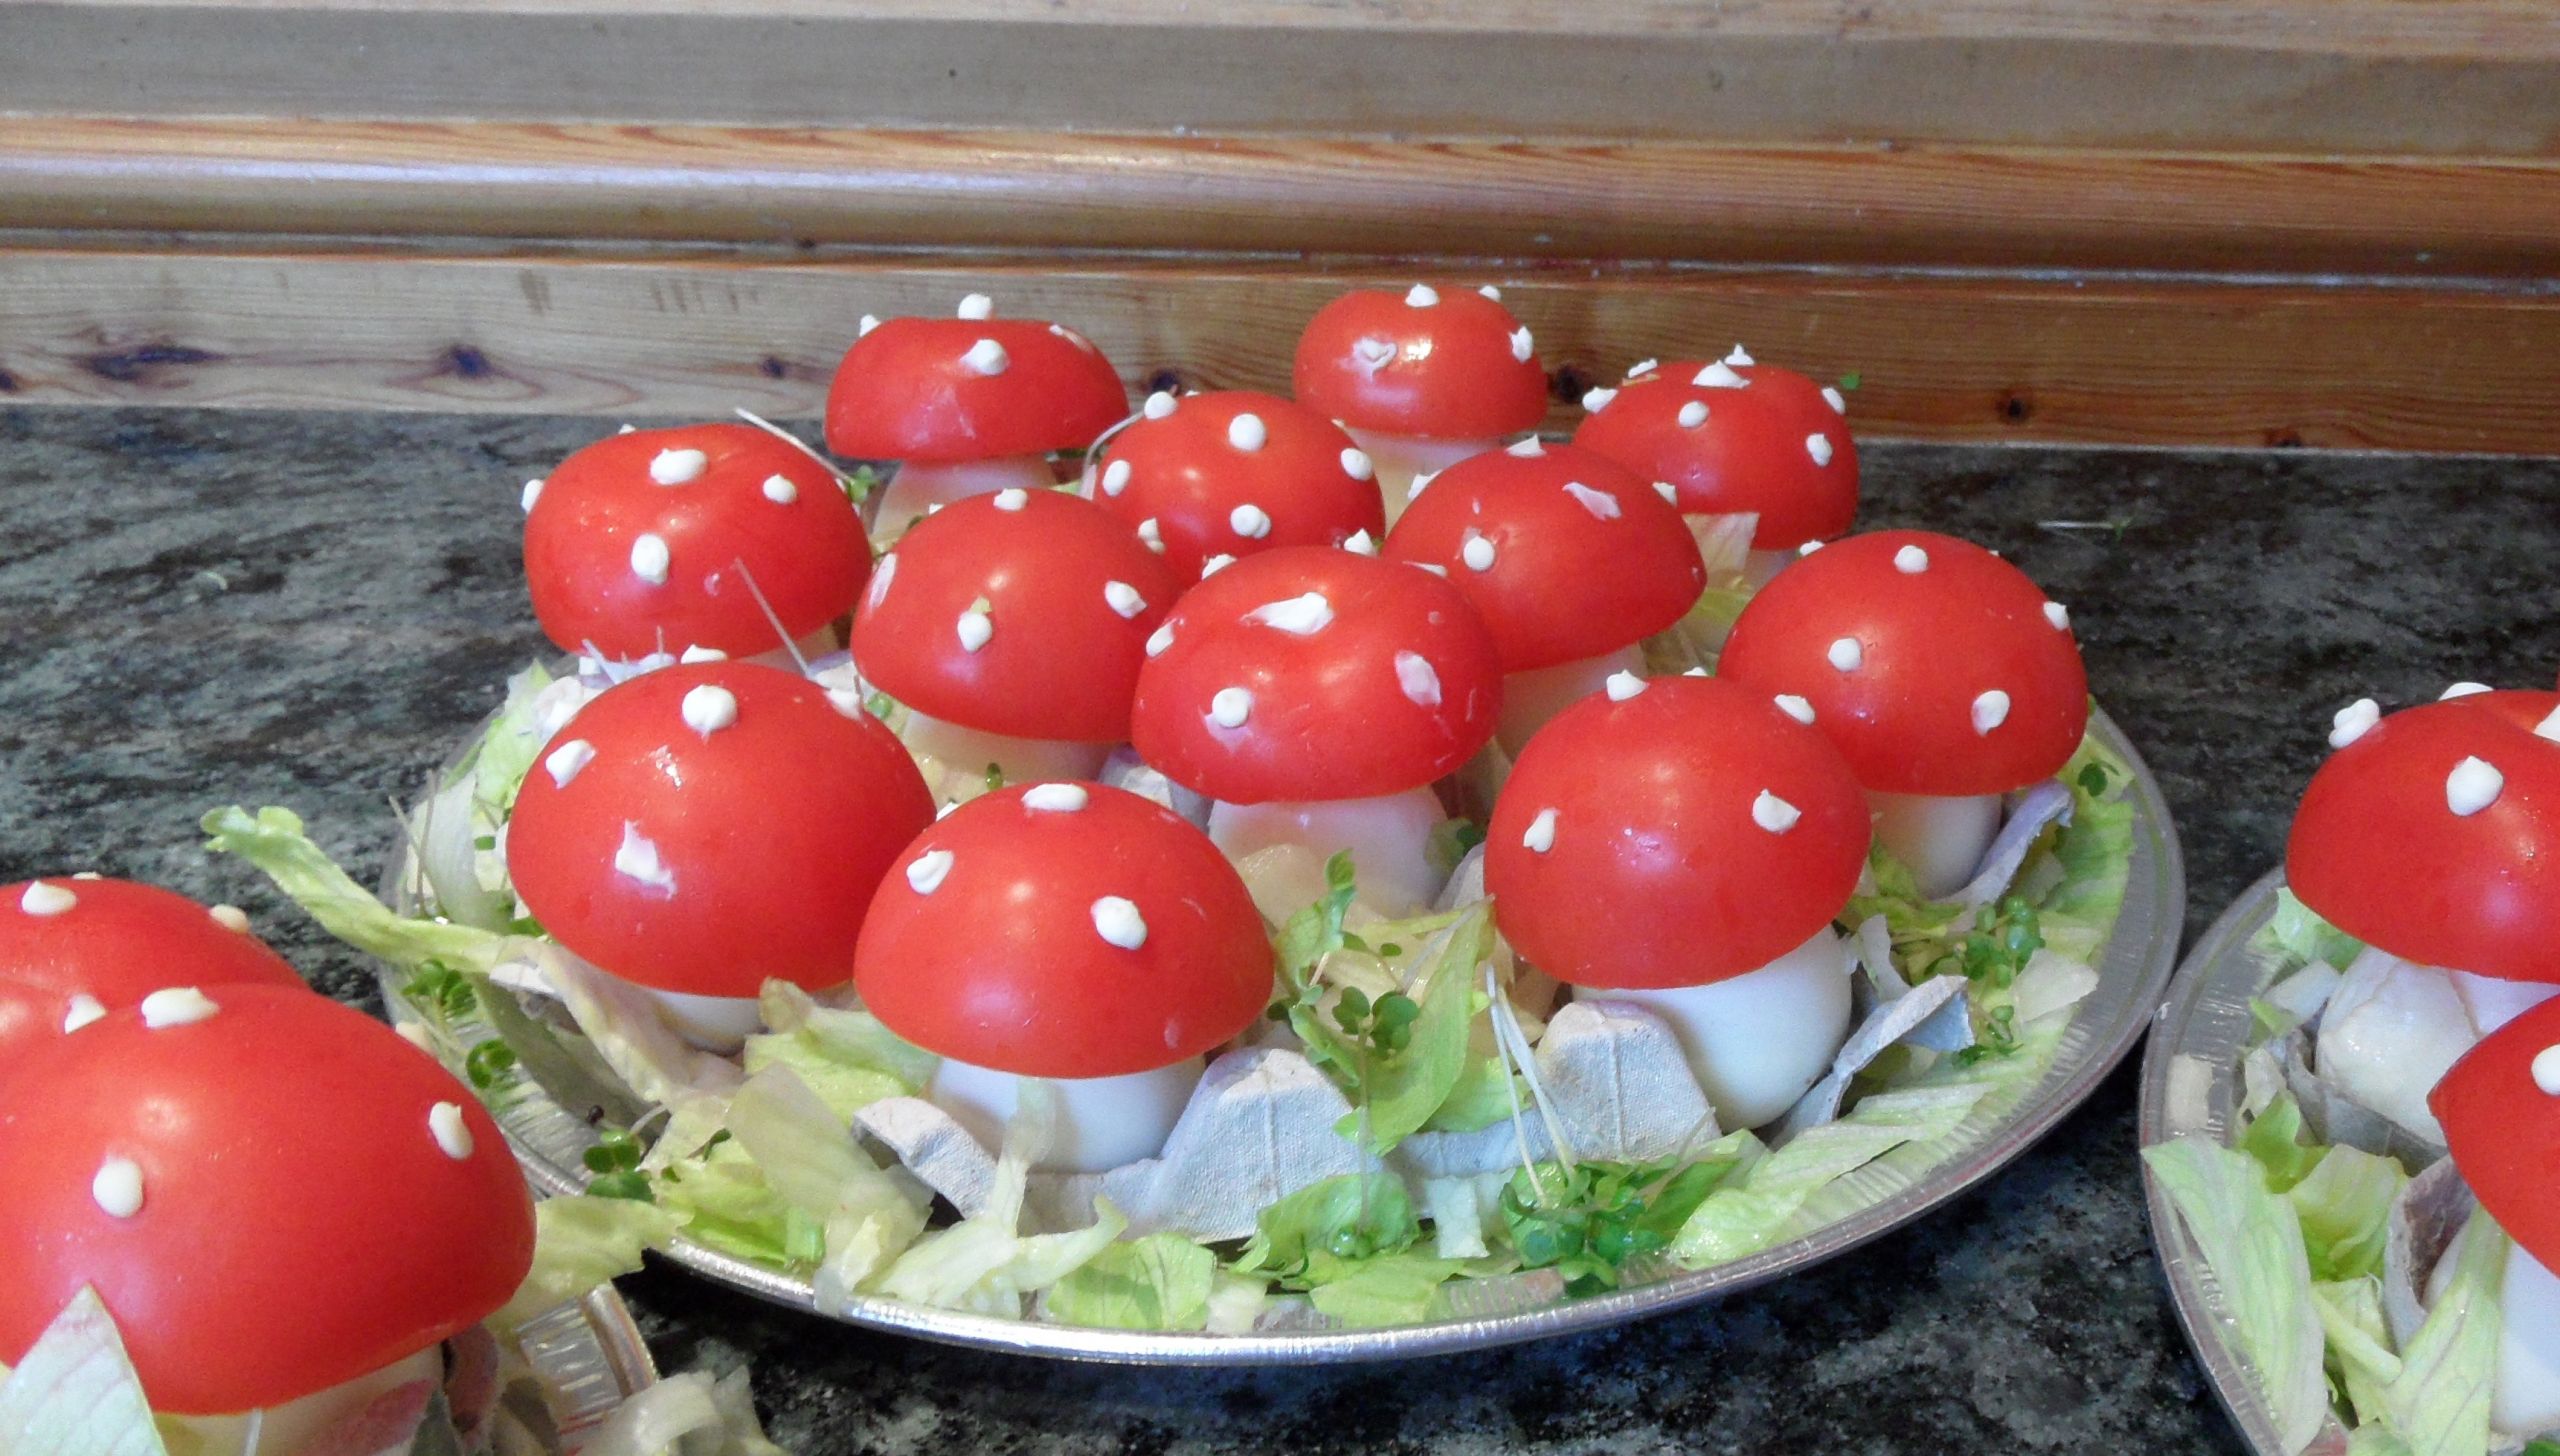 Mad Hatter Themed Tea Party Food Ideas
 Themed Party Food Ideas Magic Toadstools